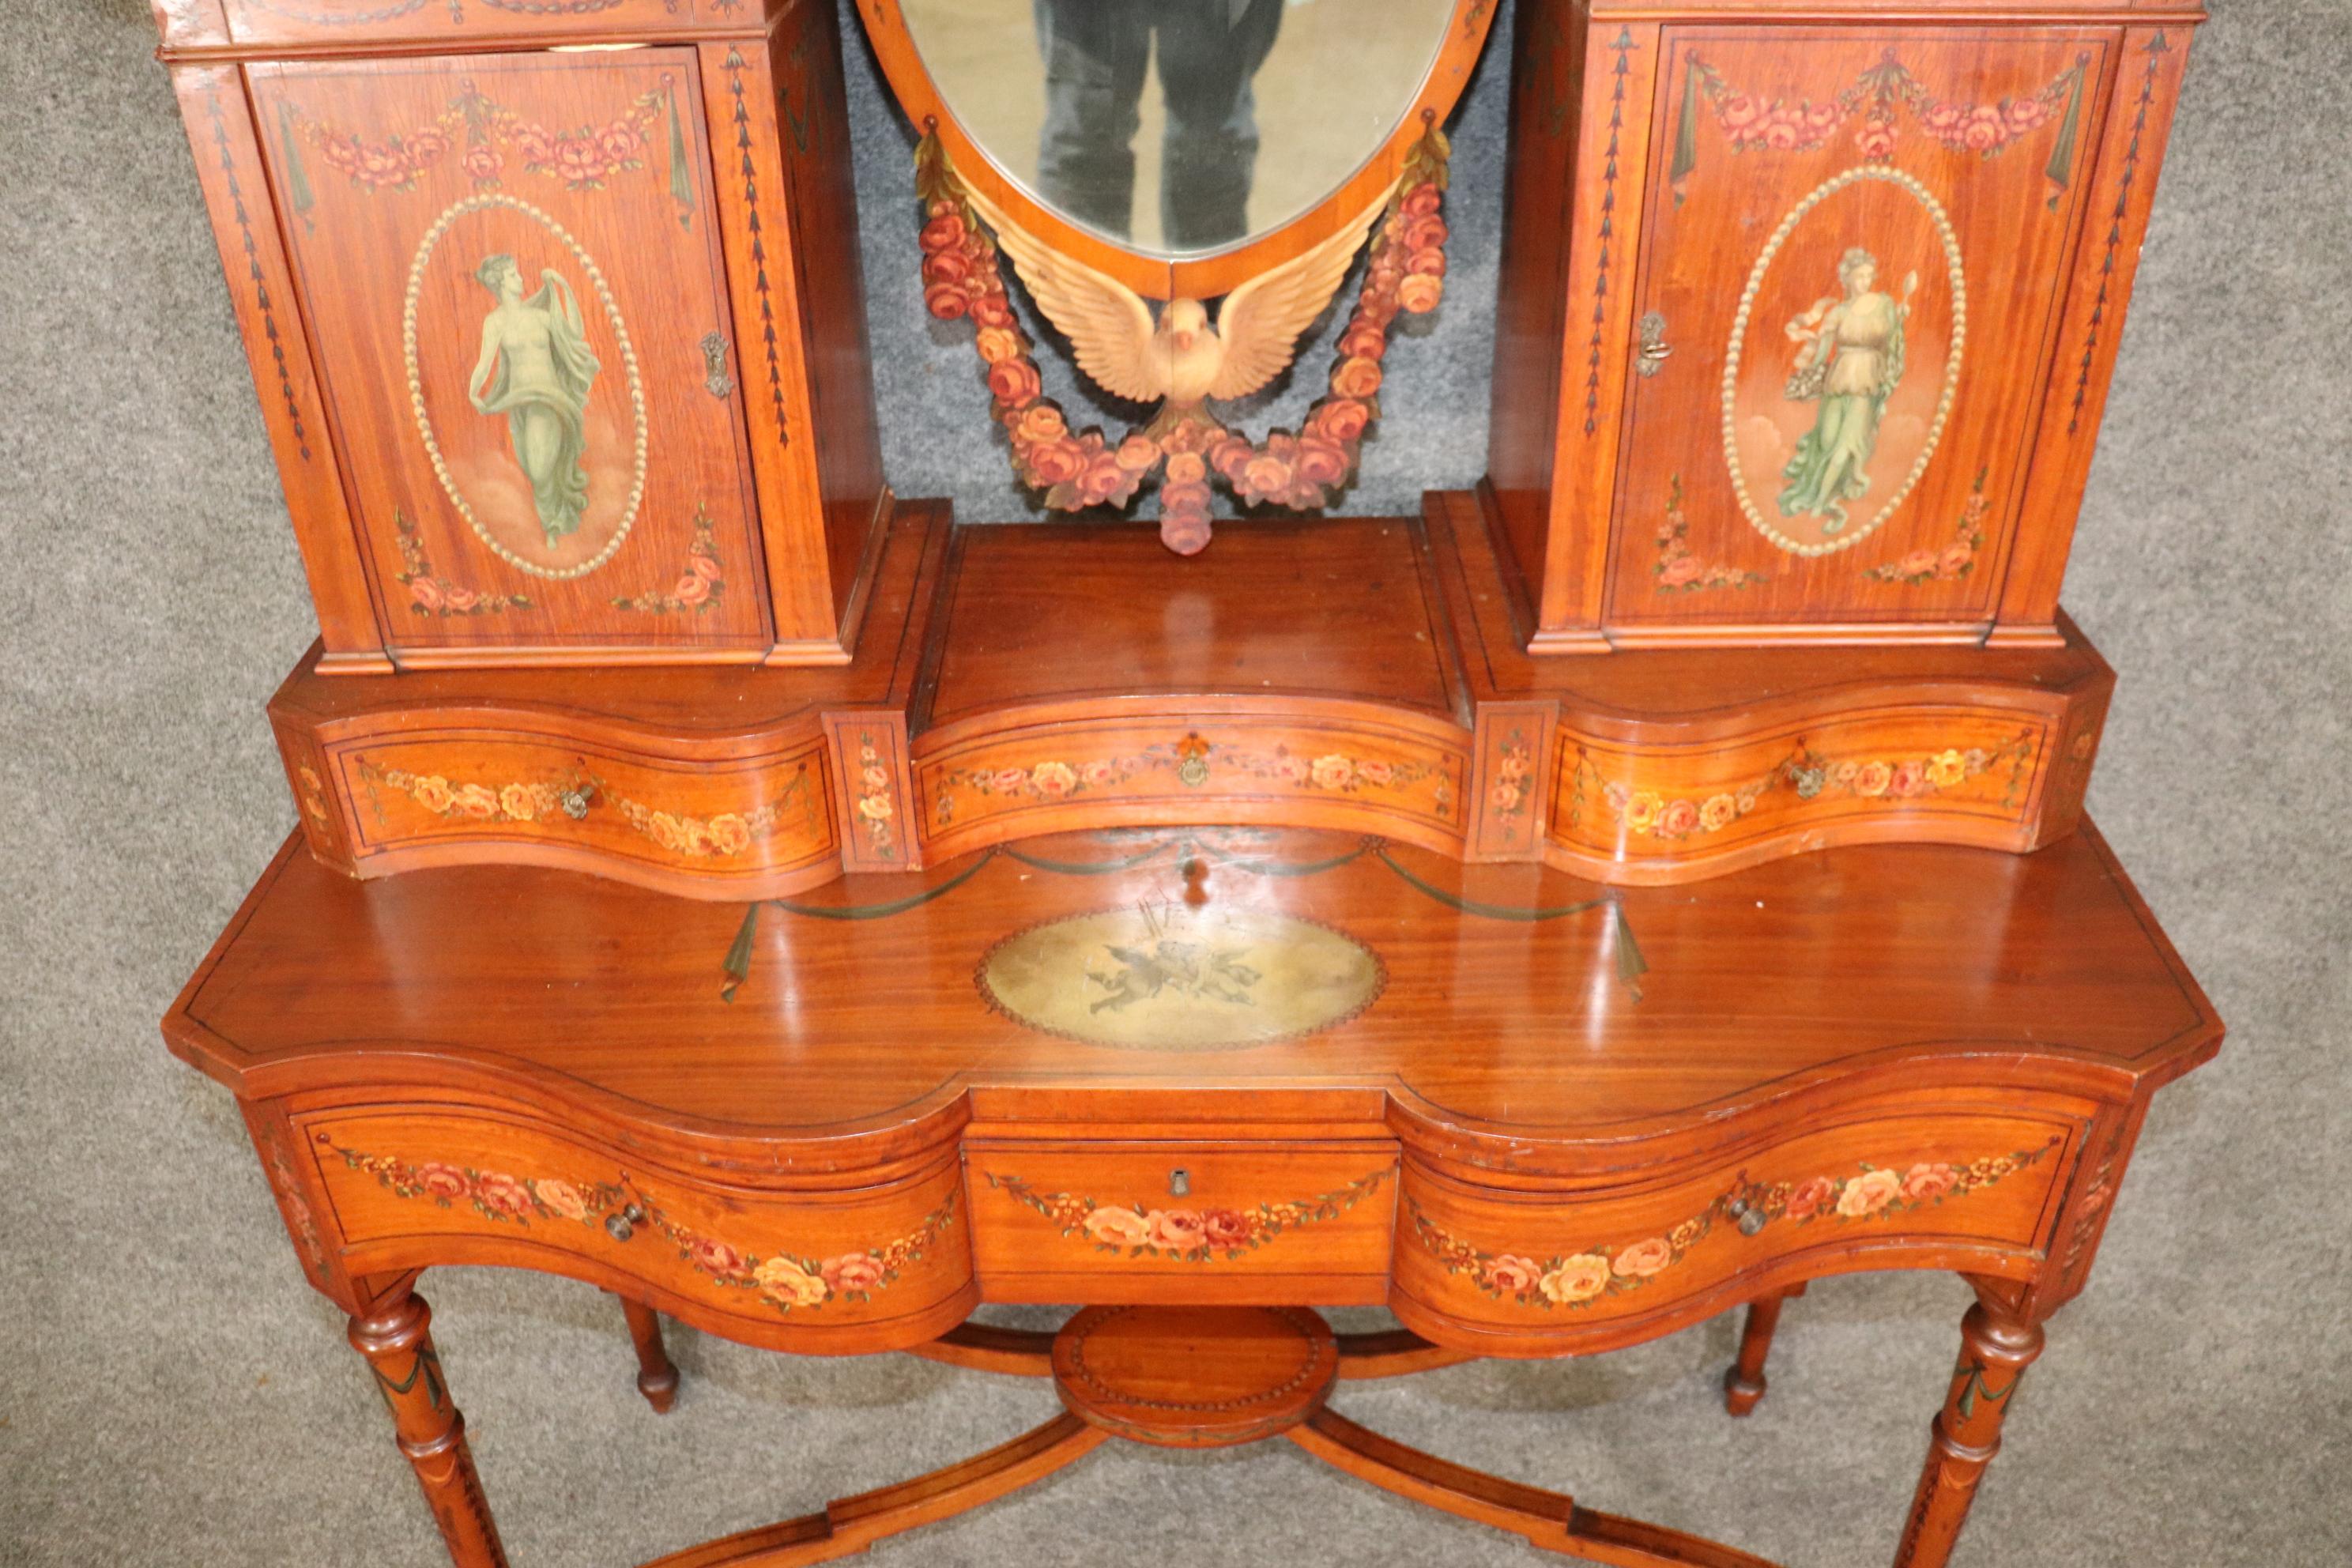 Fine Quality Gillow & Co Satinwood Paint Decorated Ladies Vanity Circa 1890s For Sale 9